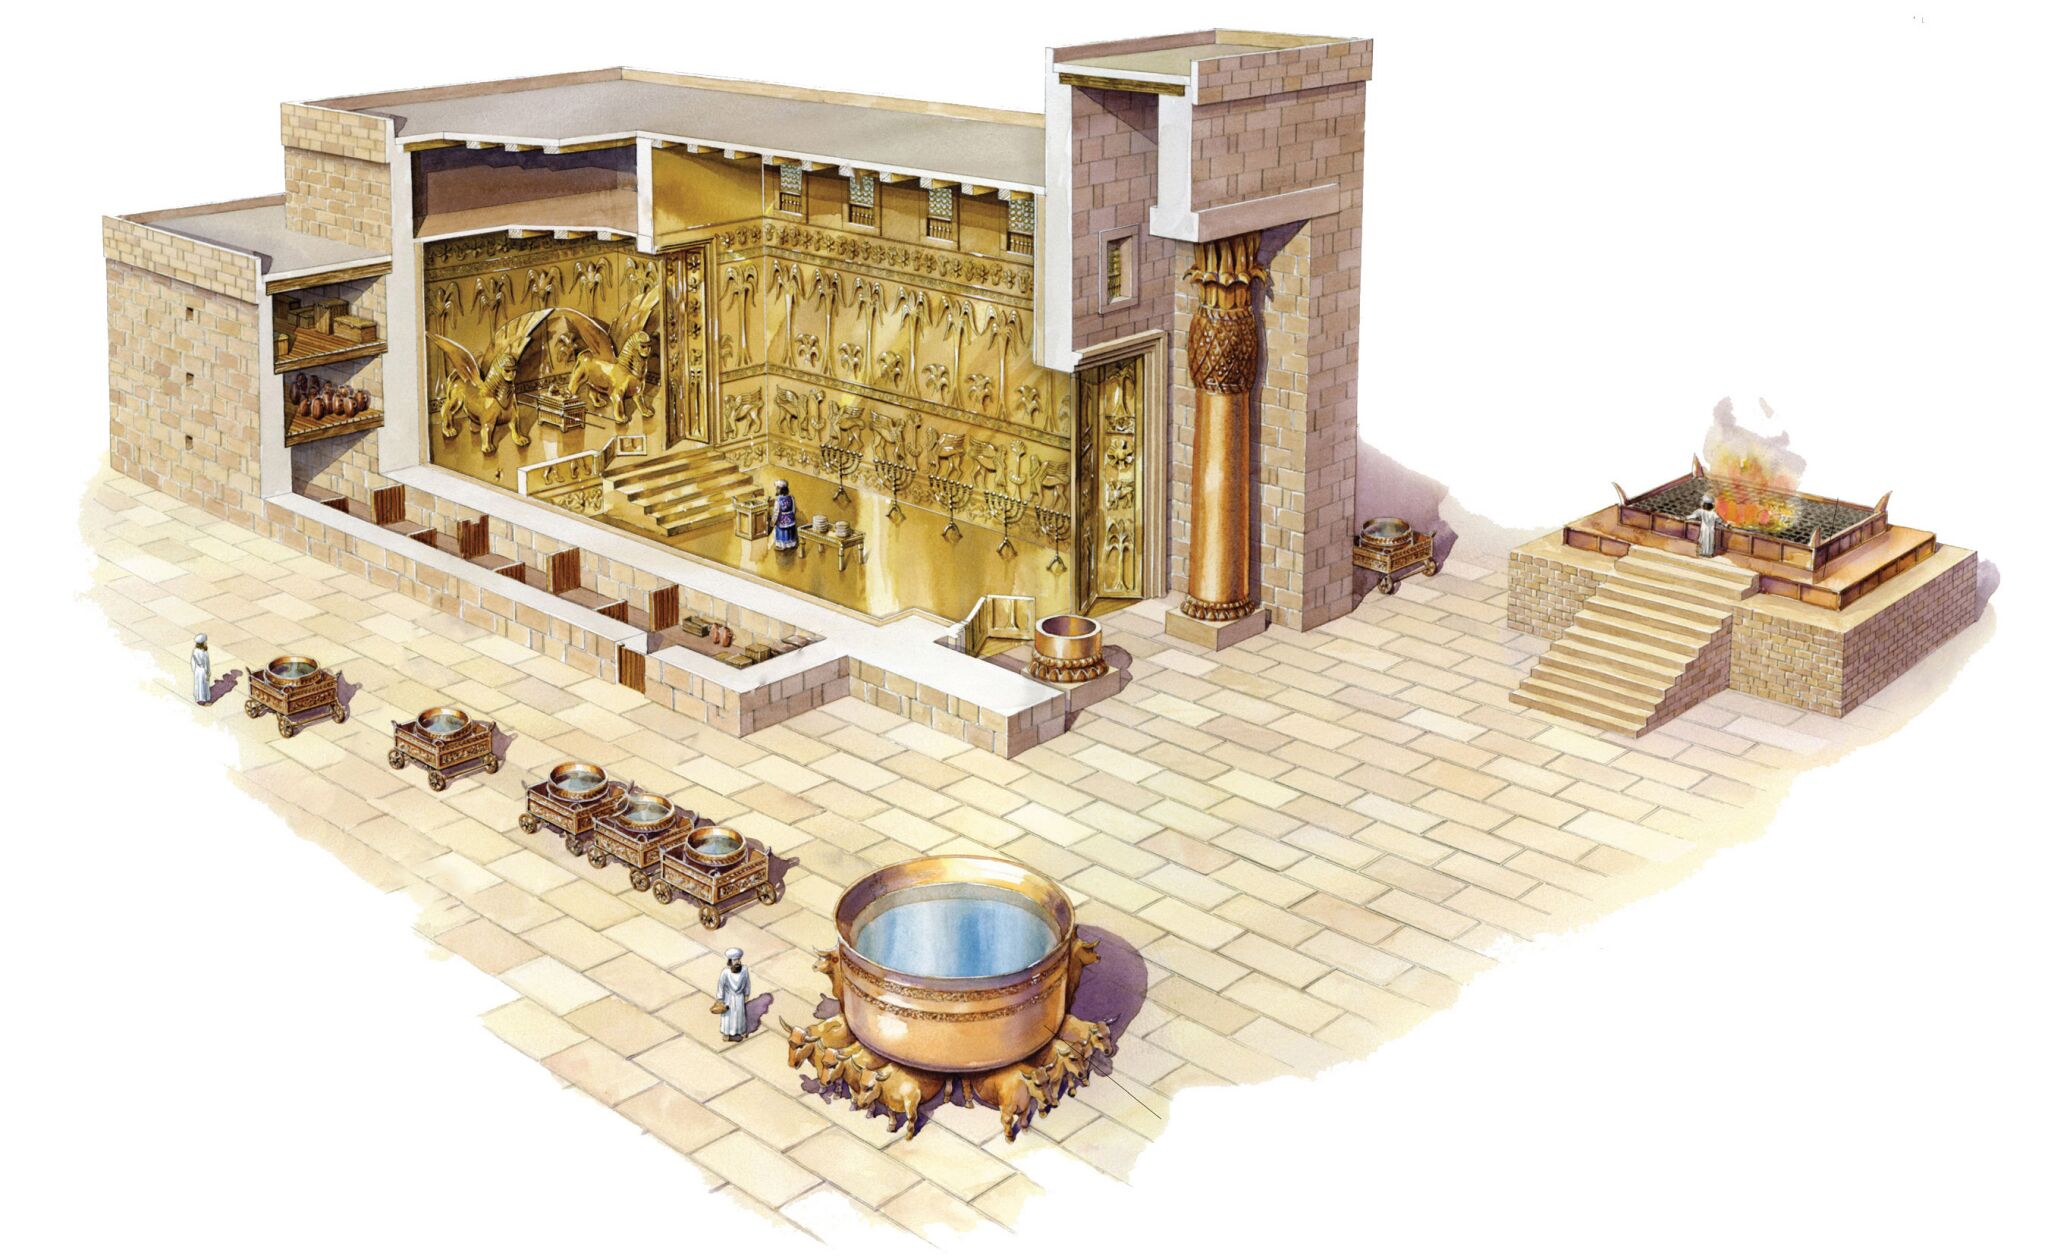 B.C.E.: How the Date for Solomon's Temple Was Determined |